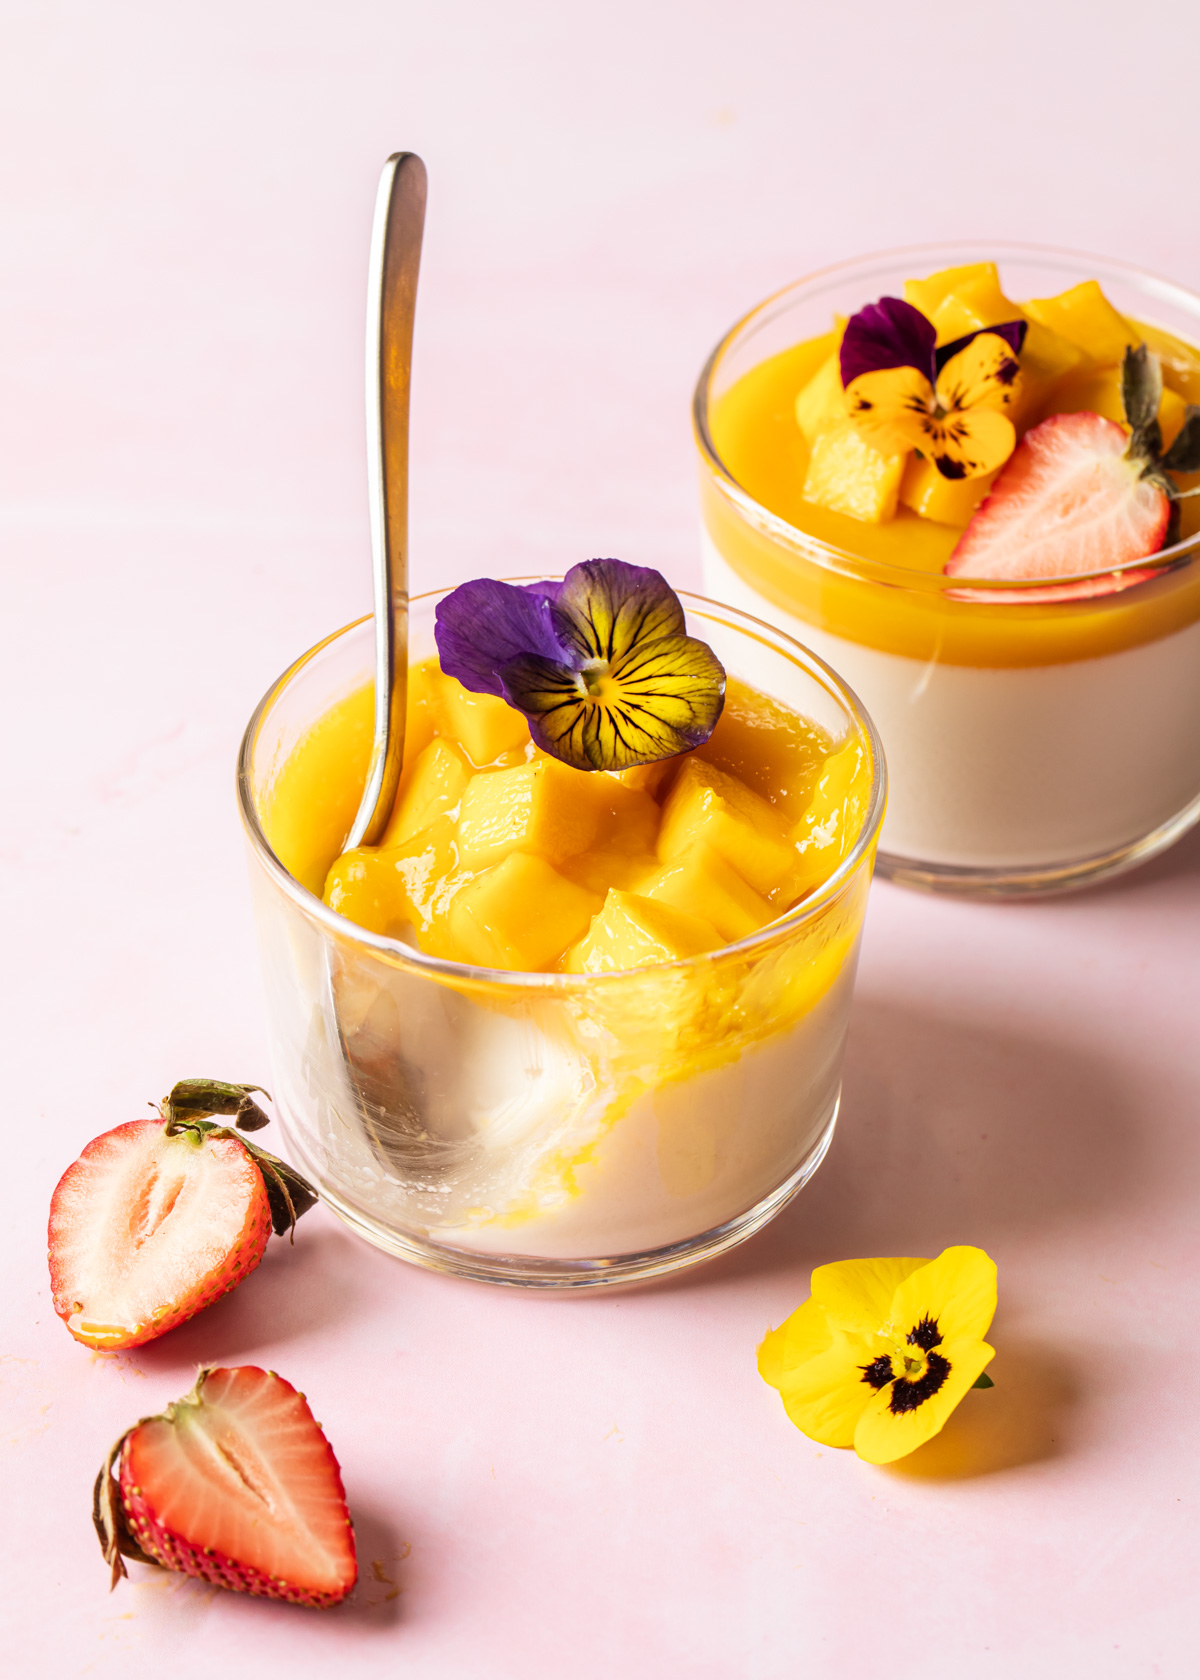 Two glass dishes filled with mango panna cotta with edible flowers and strawberries on top